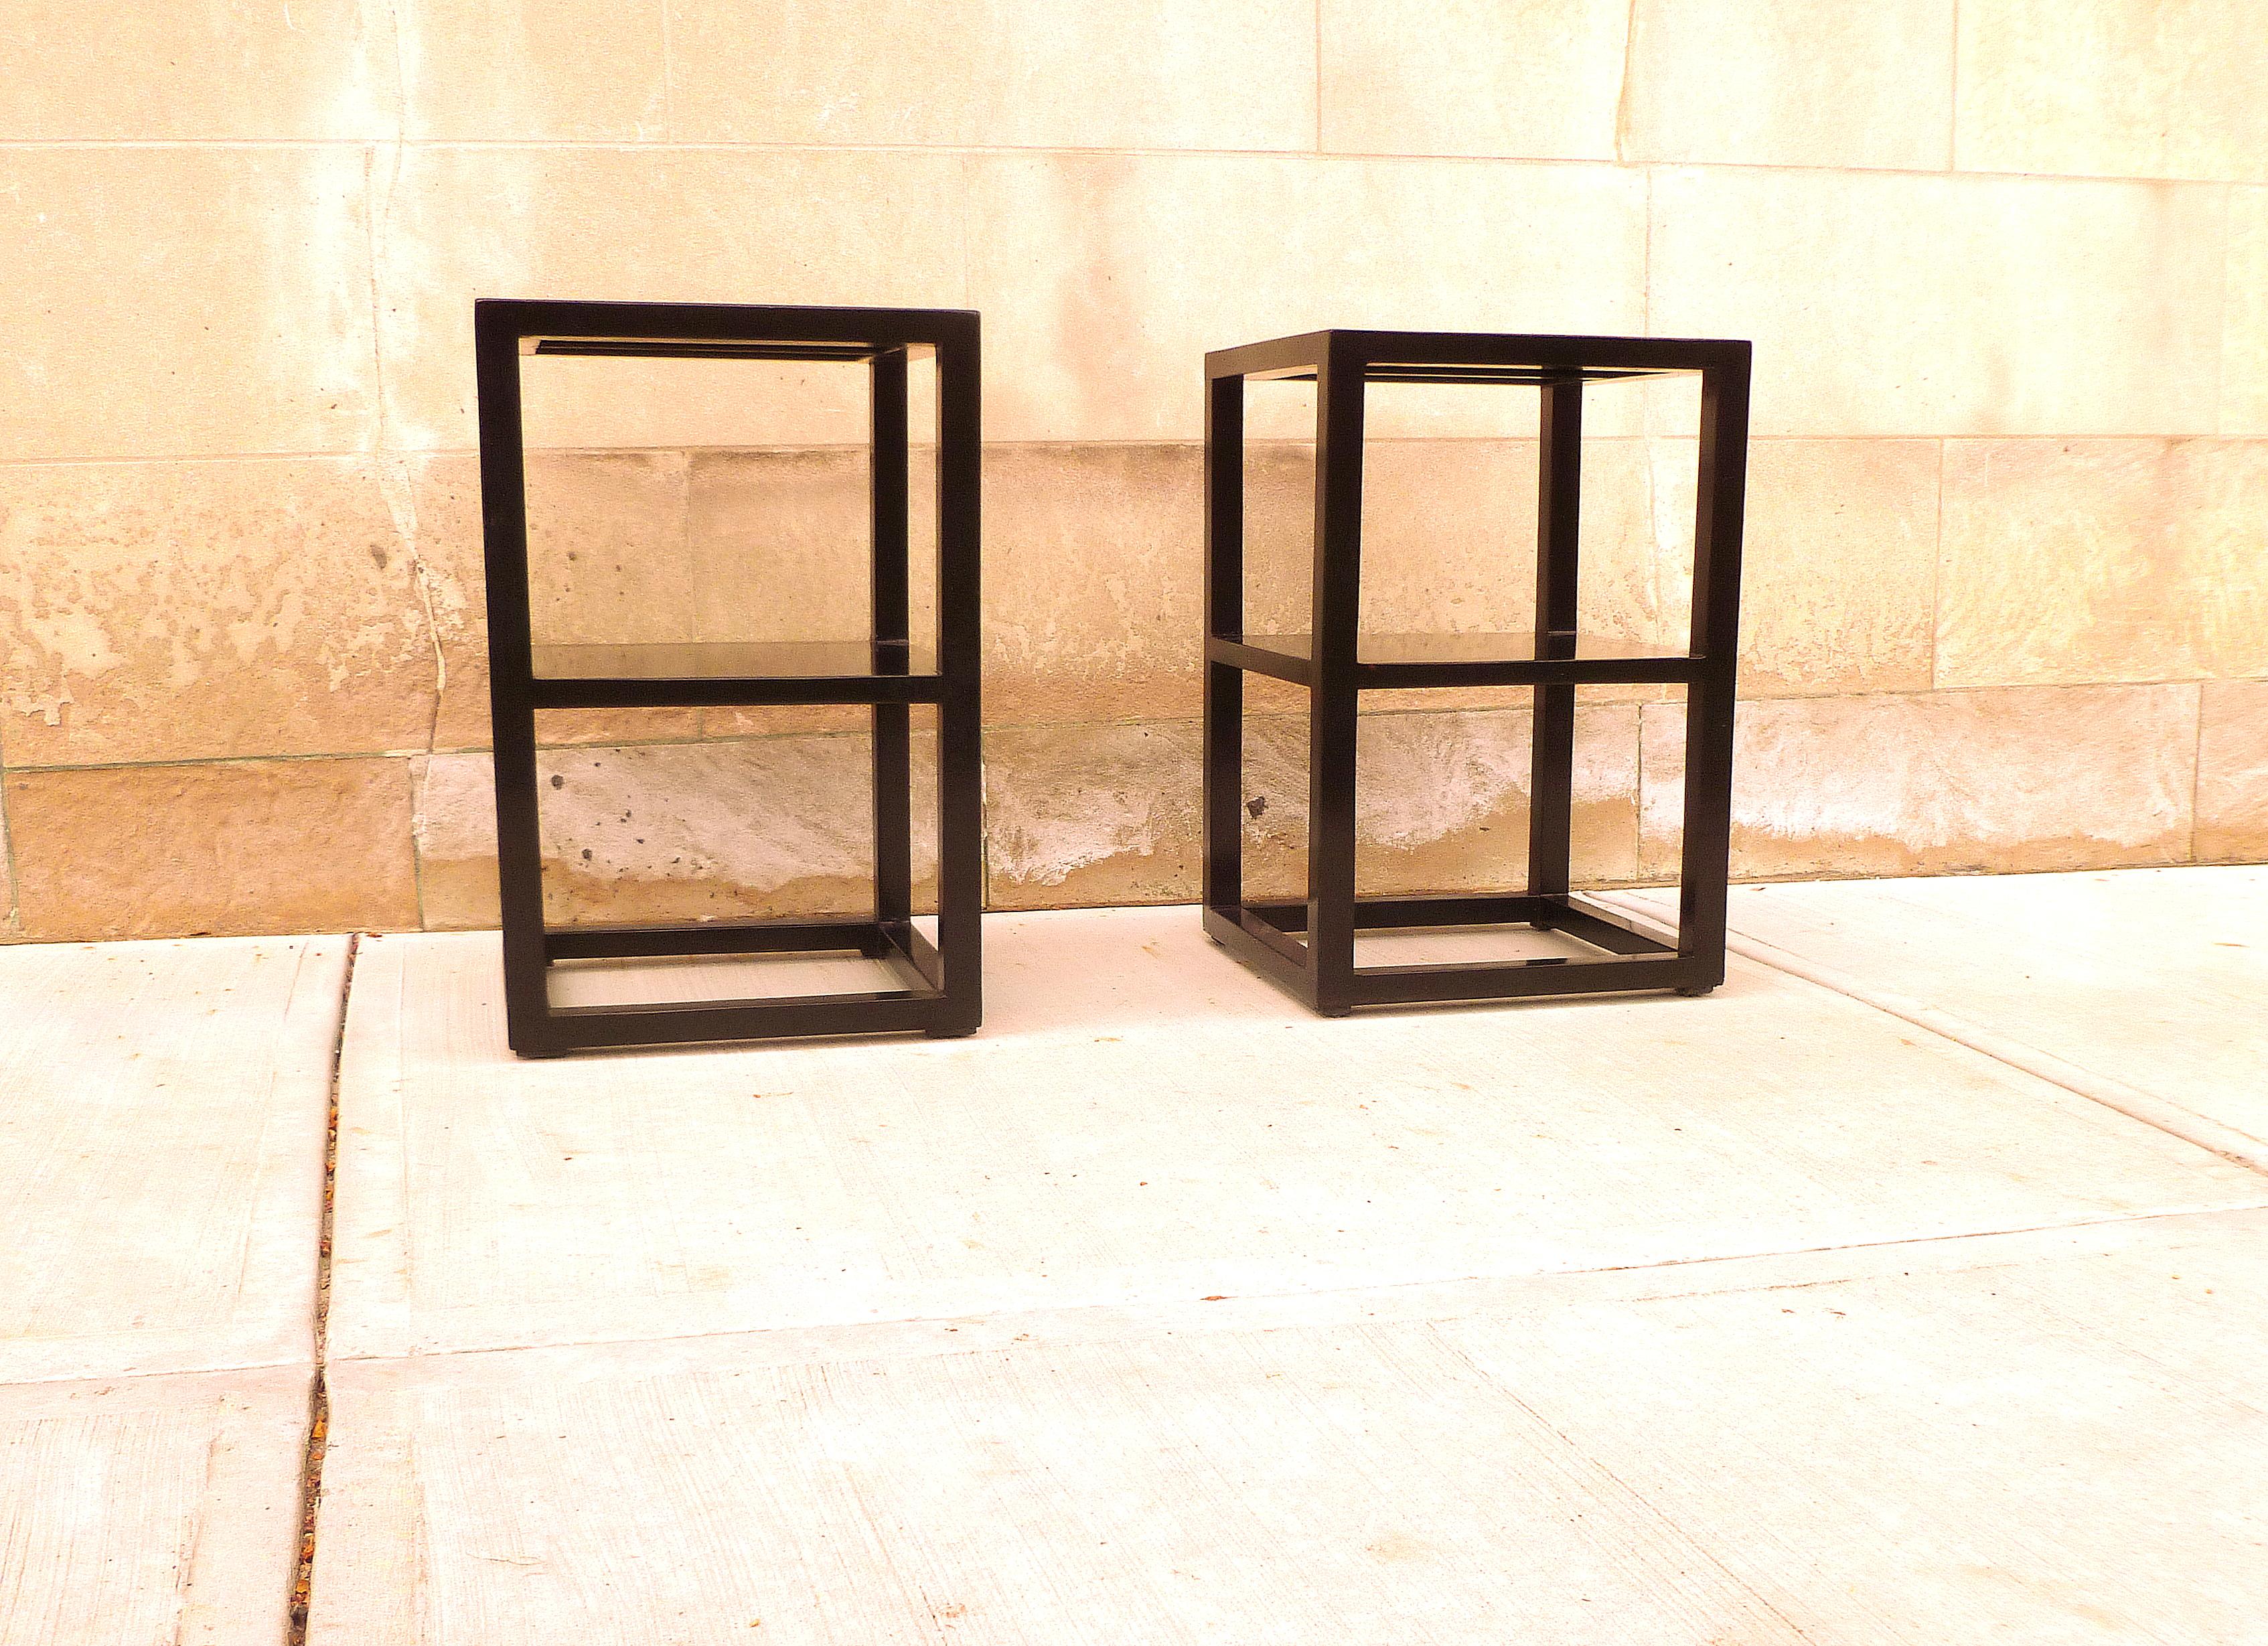 Pair of Fine Black Lacquer End Tables 1